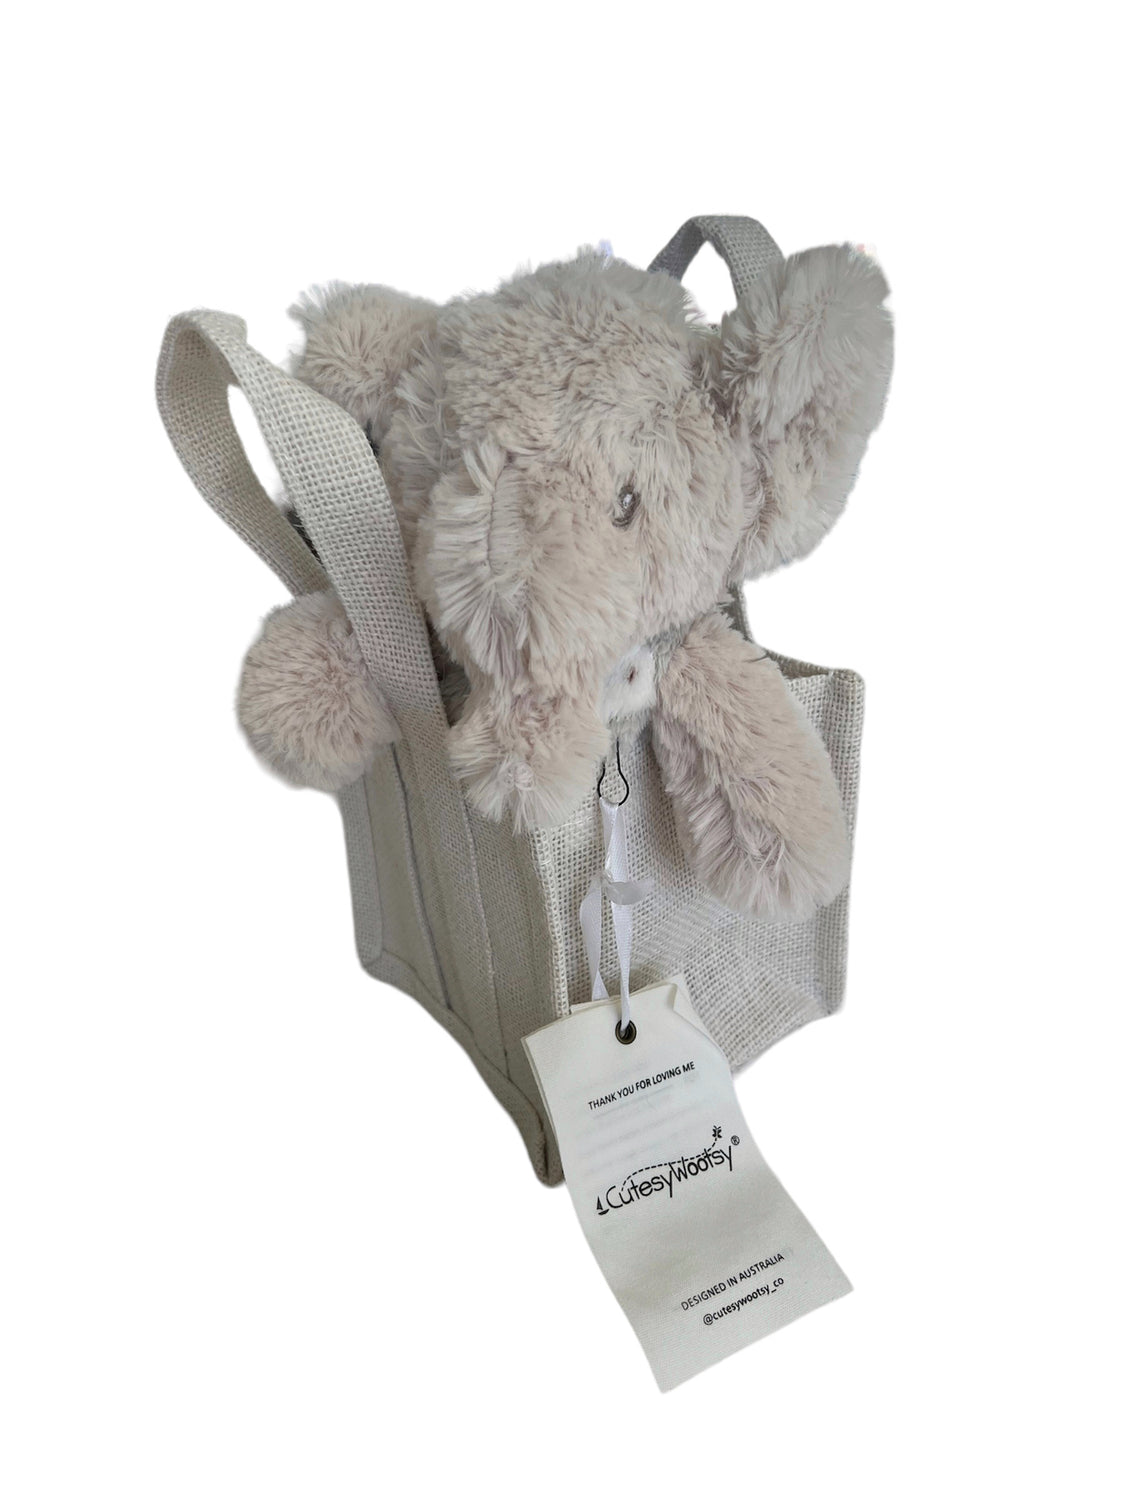 $35 Delight: Mini Snuggle Blanket or Cuddly Companion - A Cozy Gift for Little Ones!